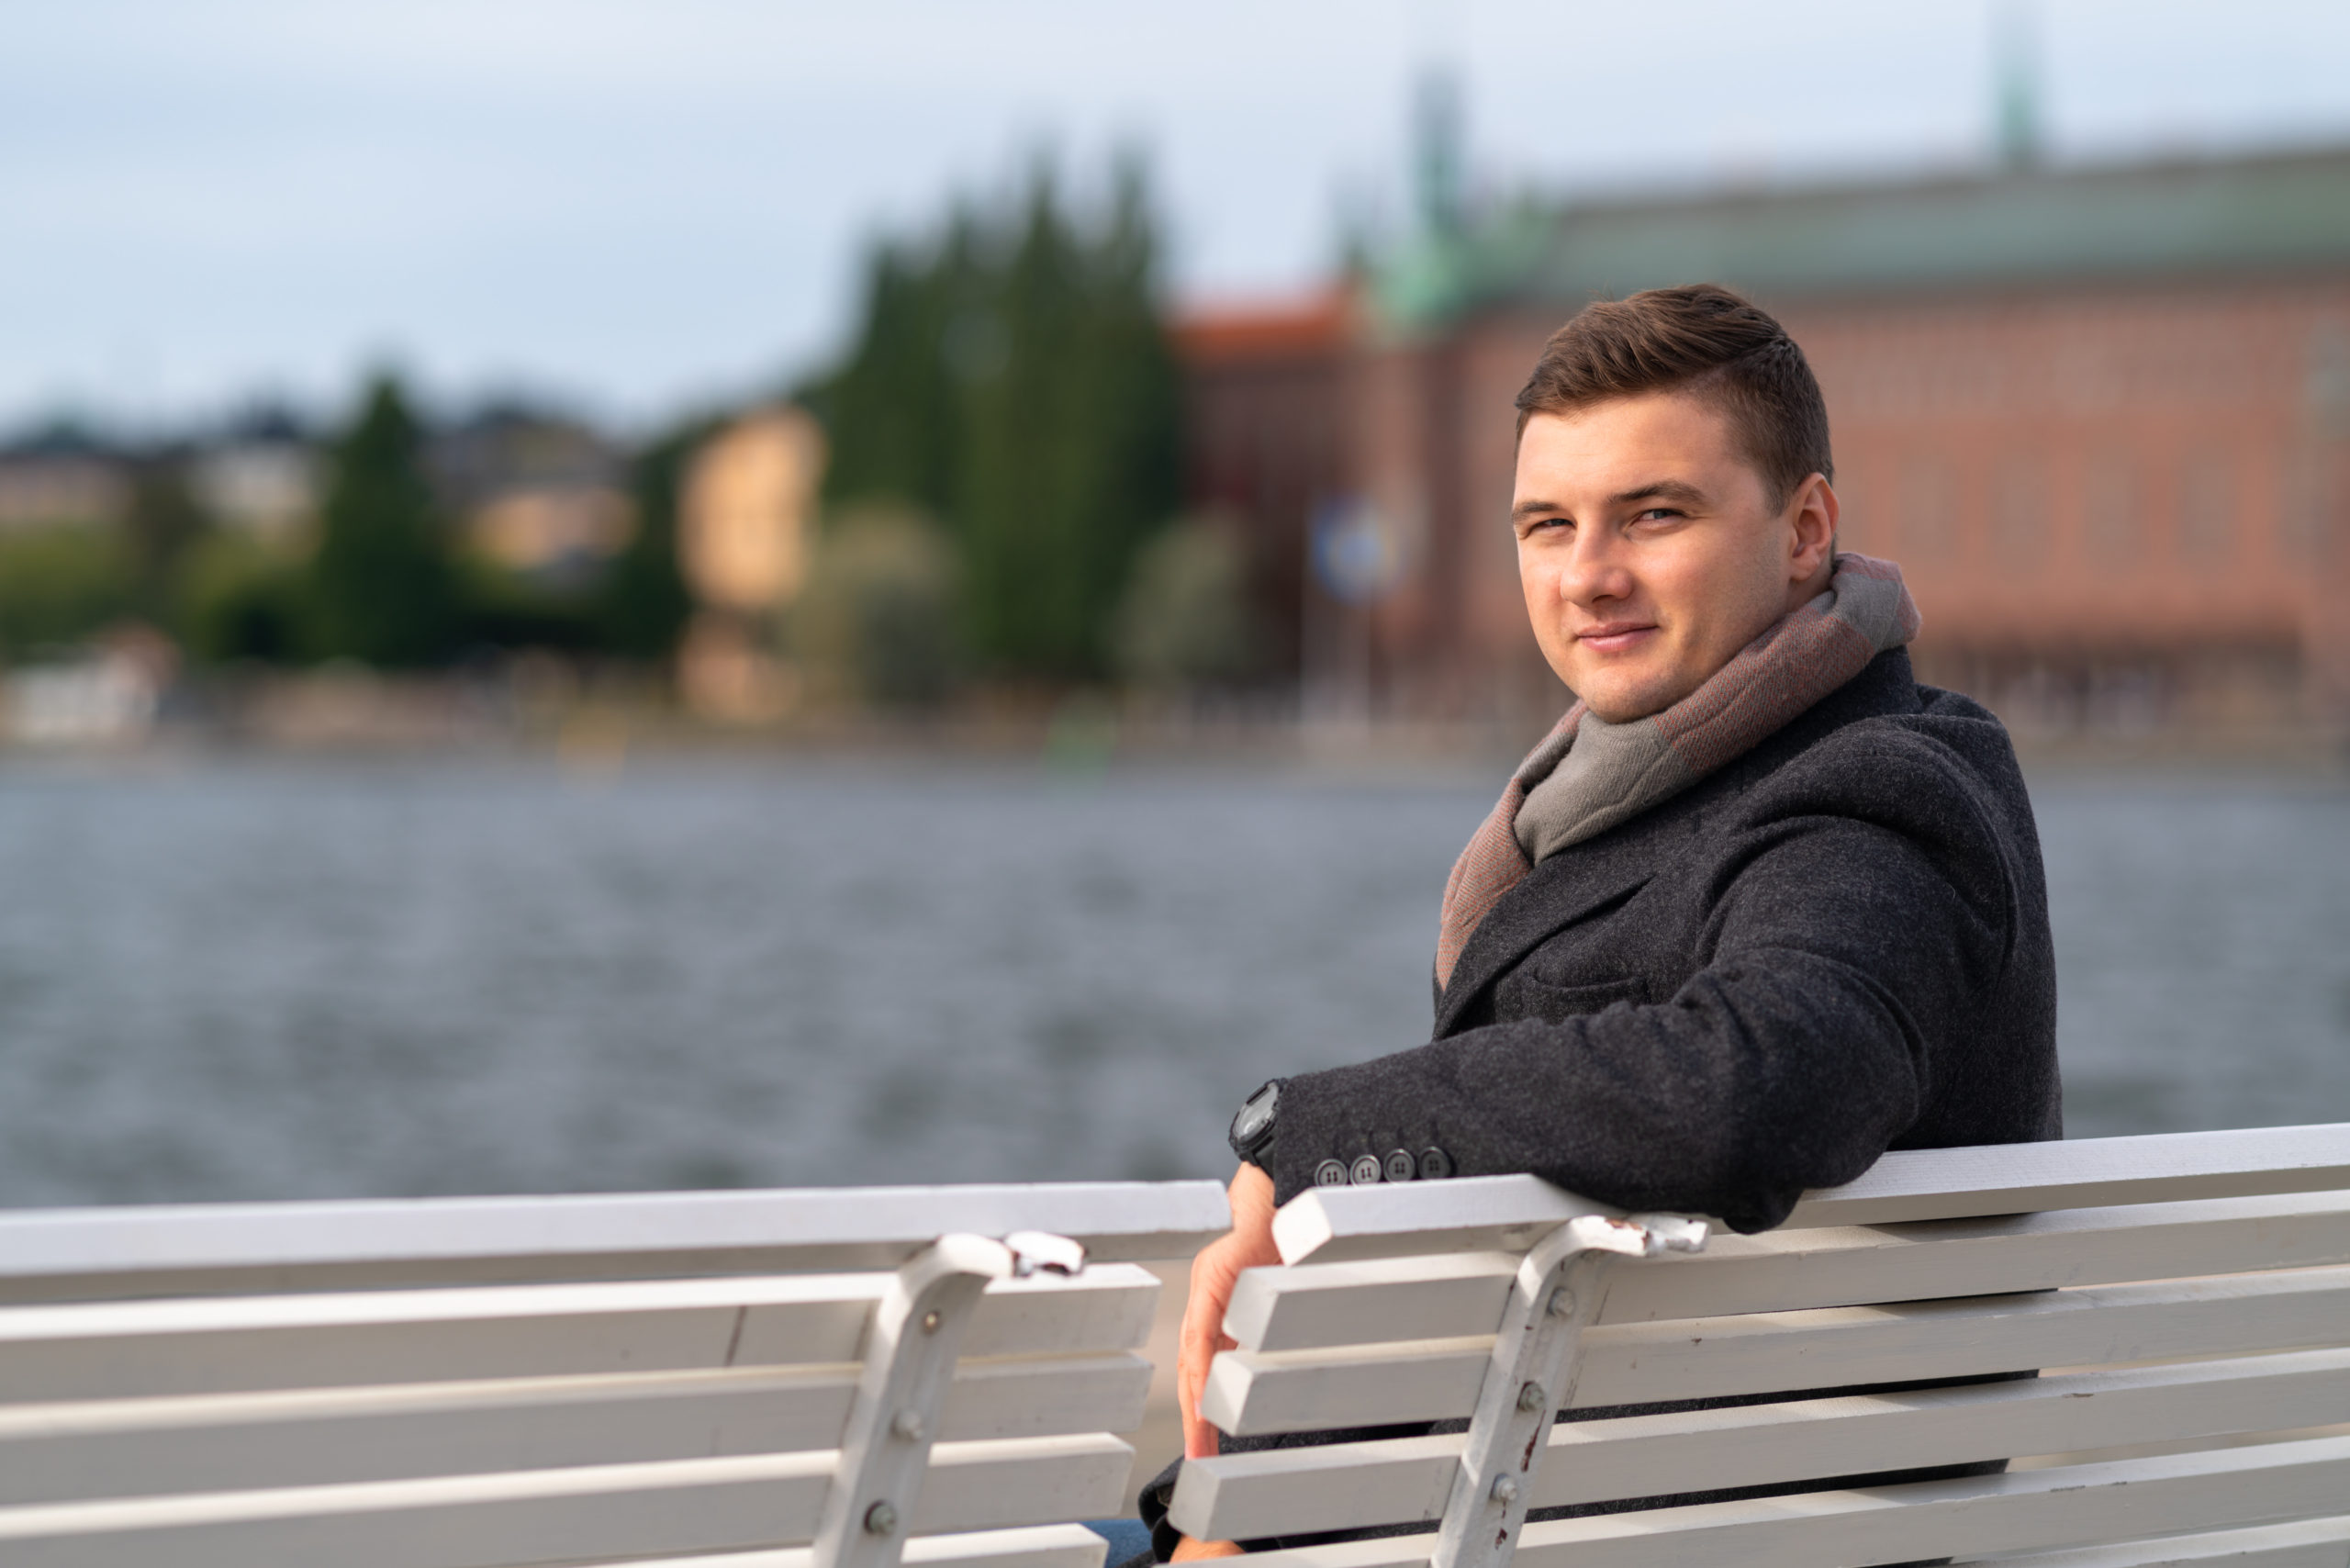 Attractive young man in warm coat and scarf sitting on a bench outdoors overlooking choppy water turning to smile at the camera